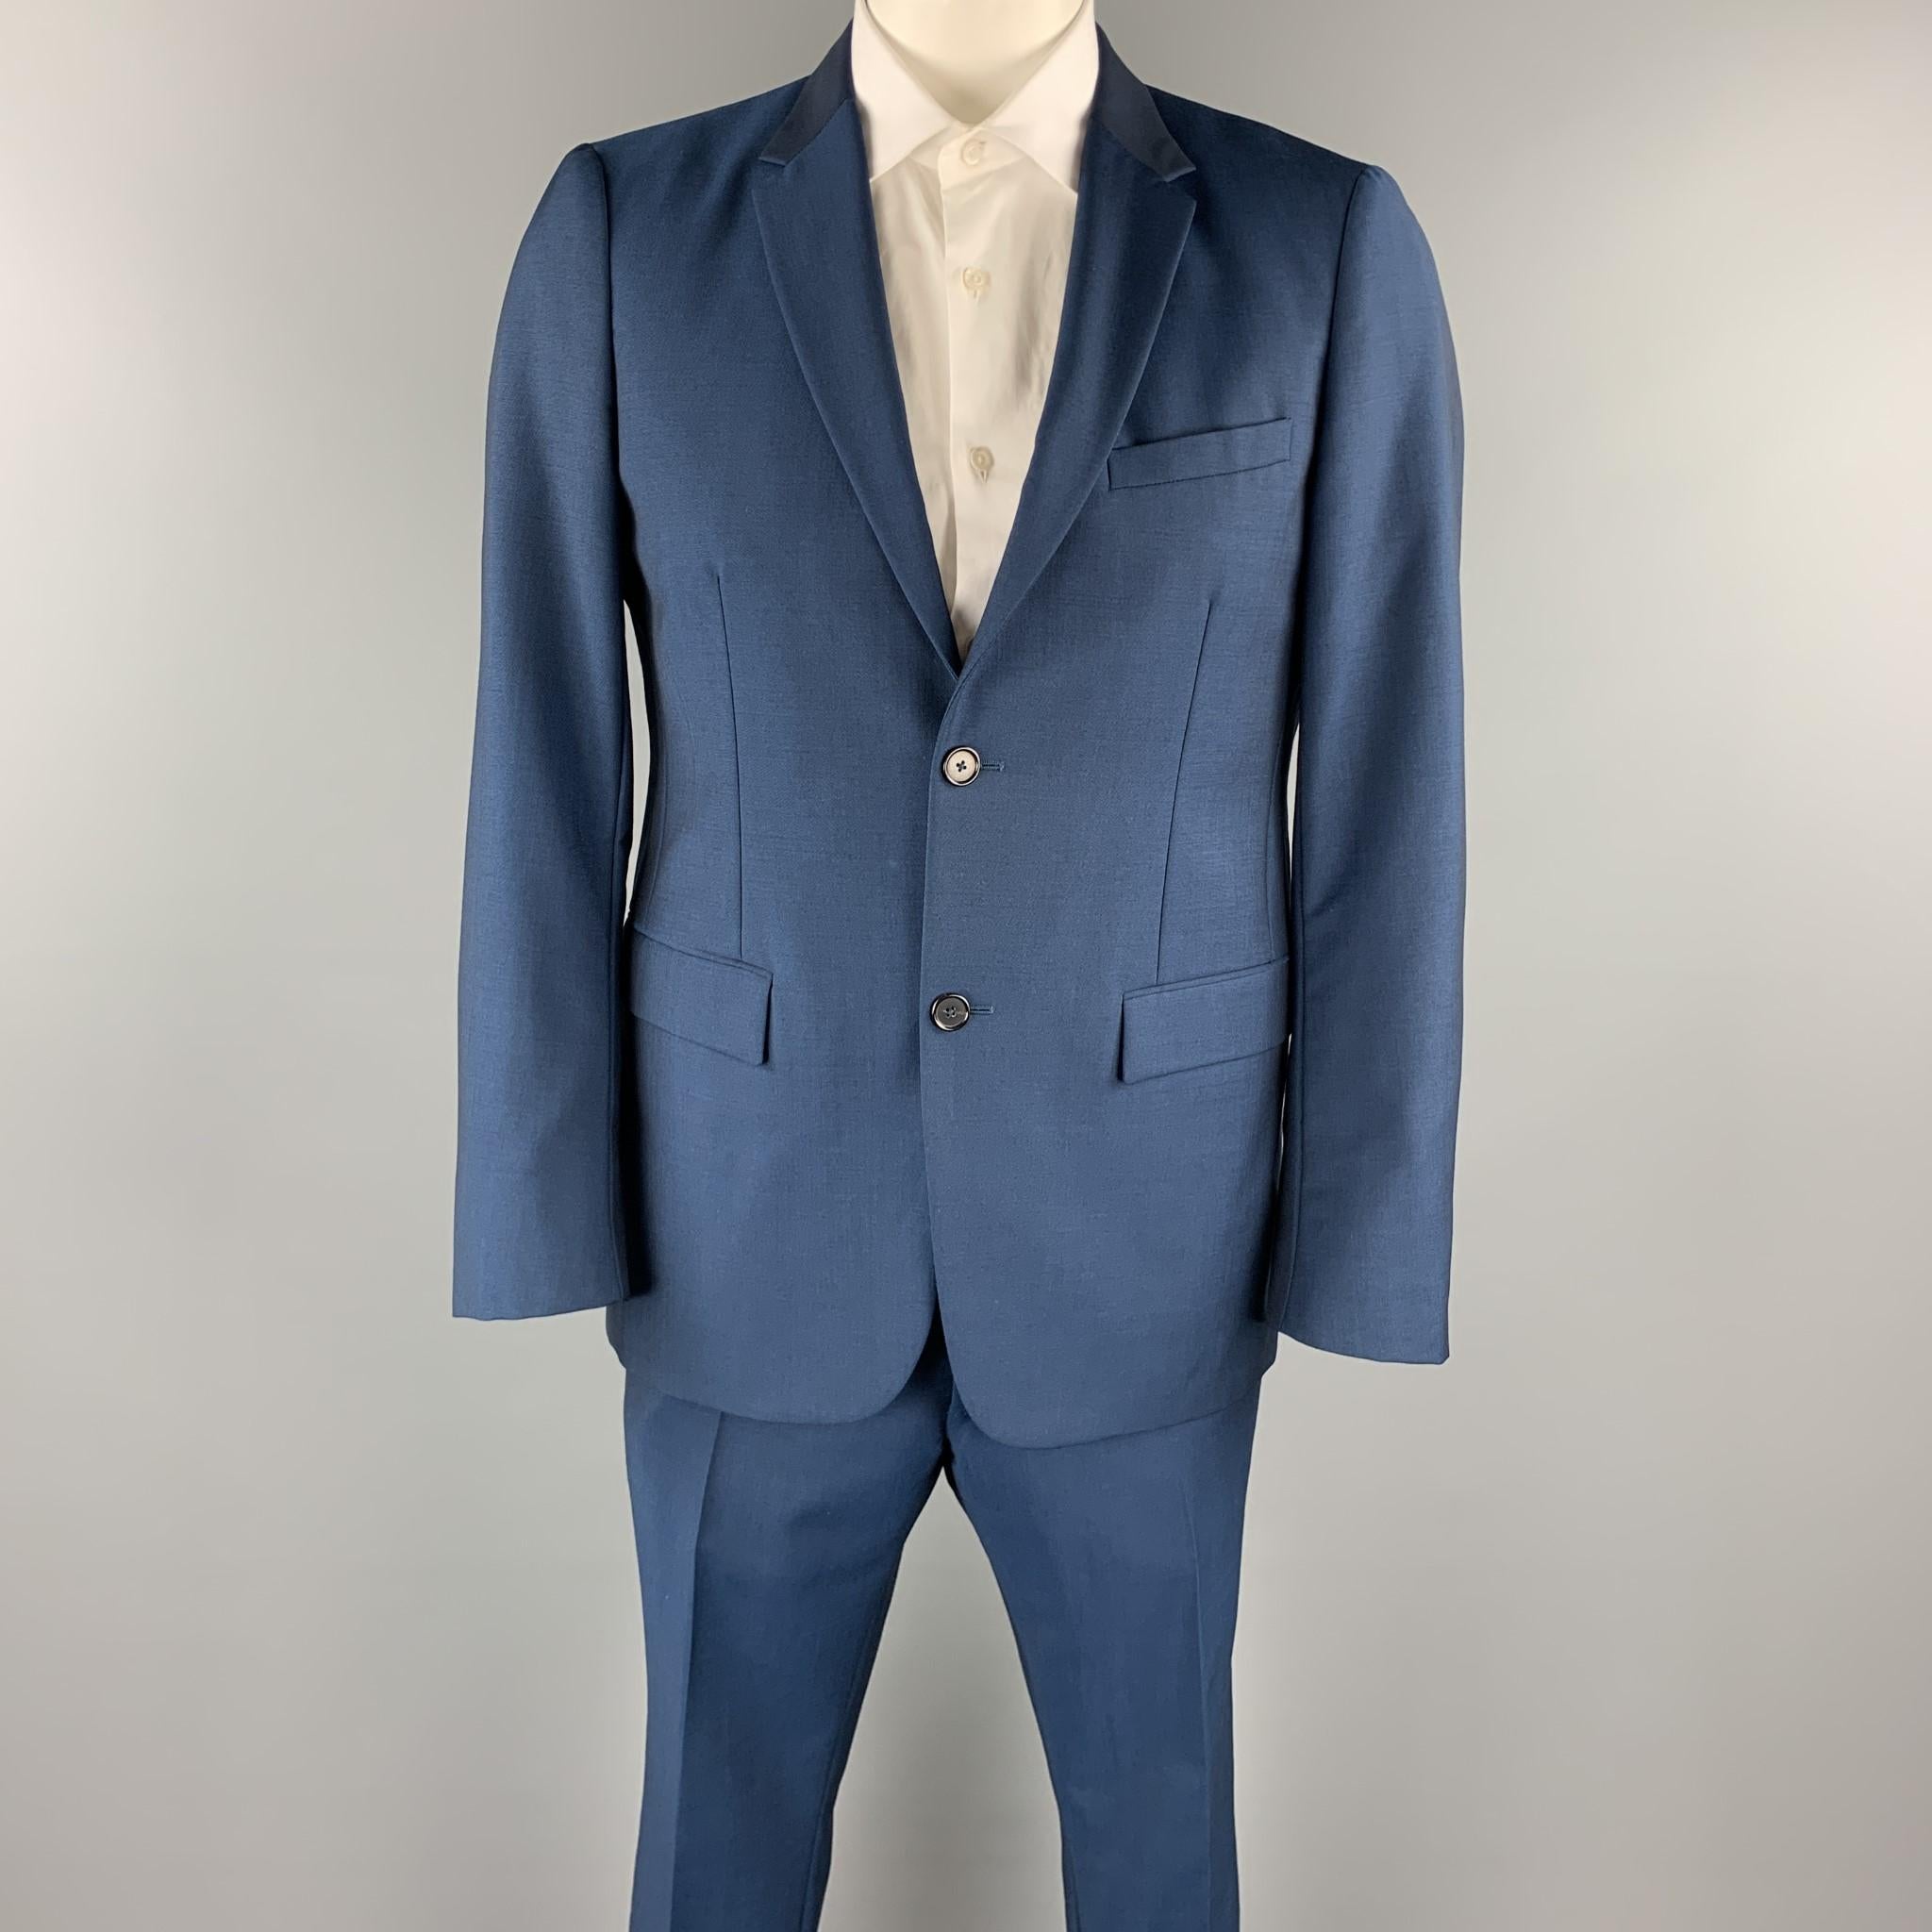 JIL SANDER suit comes in a navy wool / mohair and includes a single breasted, two button sport coat with a notch lapel and matching flat front trousers. Made in Italy.

Excellent Pre-Owned Condition.
Marked: IT 52

Measurements:

-Jacket
Shoulder: